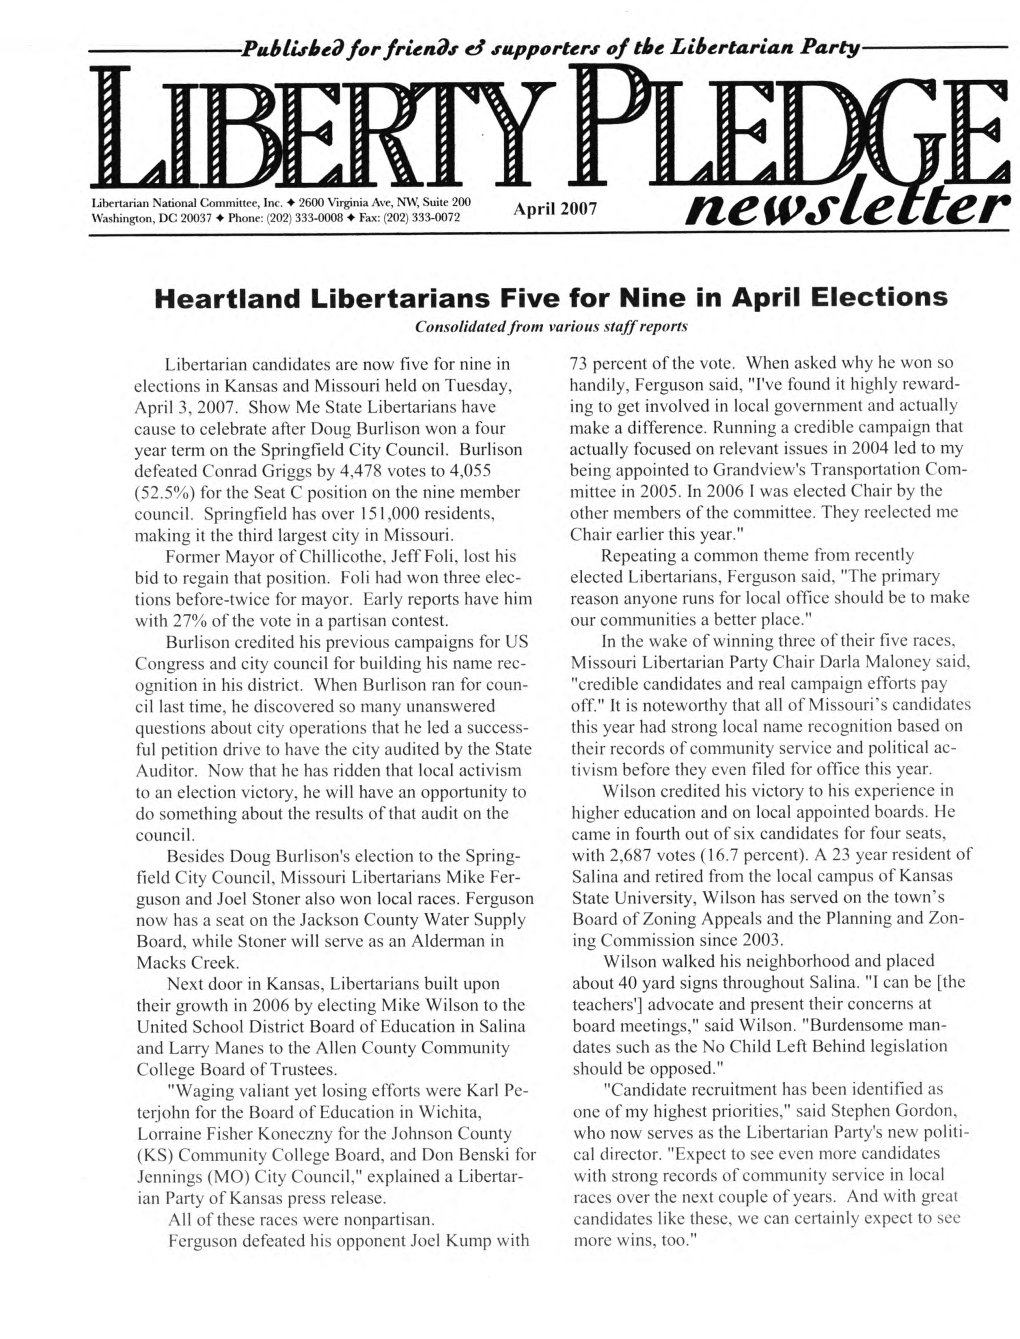 Heartland Libertarians Five for Nine in April Elections Consolidated from Various Staff Reports